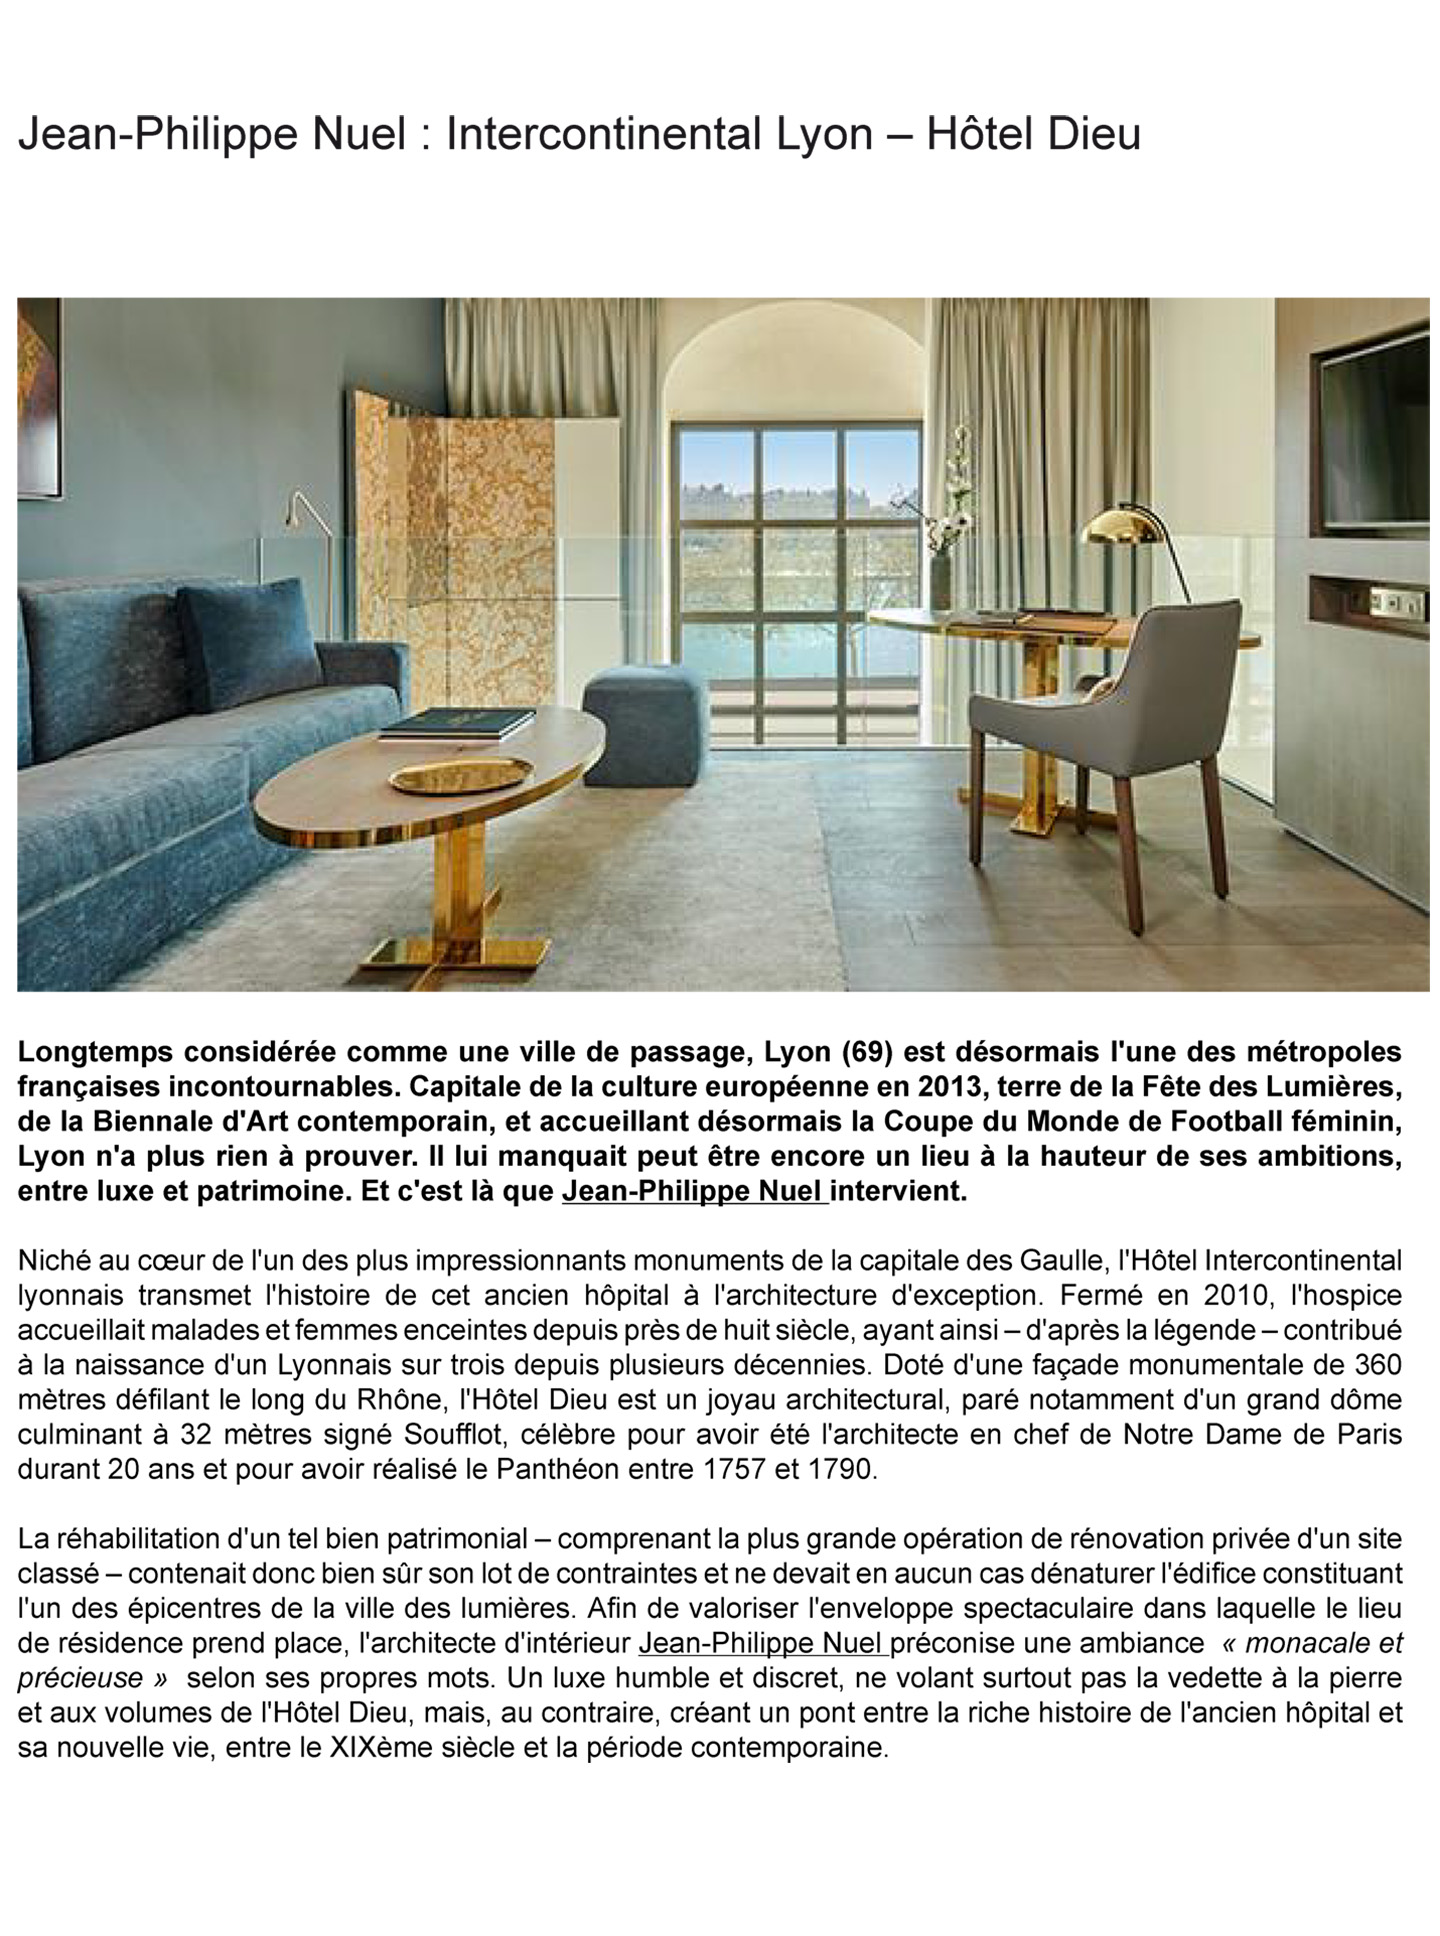 Article on the intercontinental lyon hotel dieu realized by the studio jean-Philippe Nuel in the magazine muuuz, new luxury hotel, luxury interior design